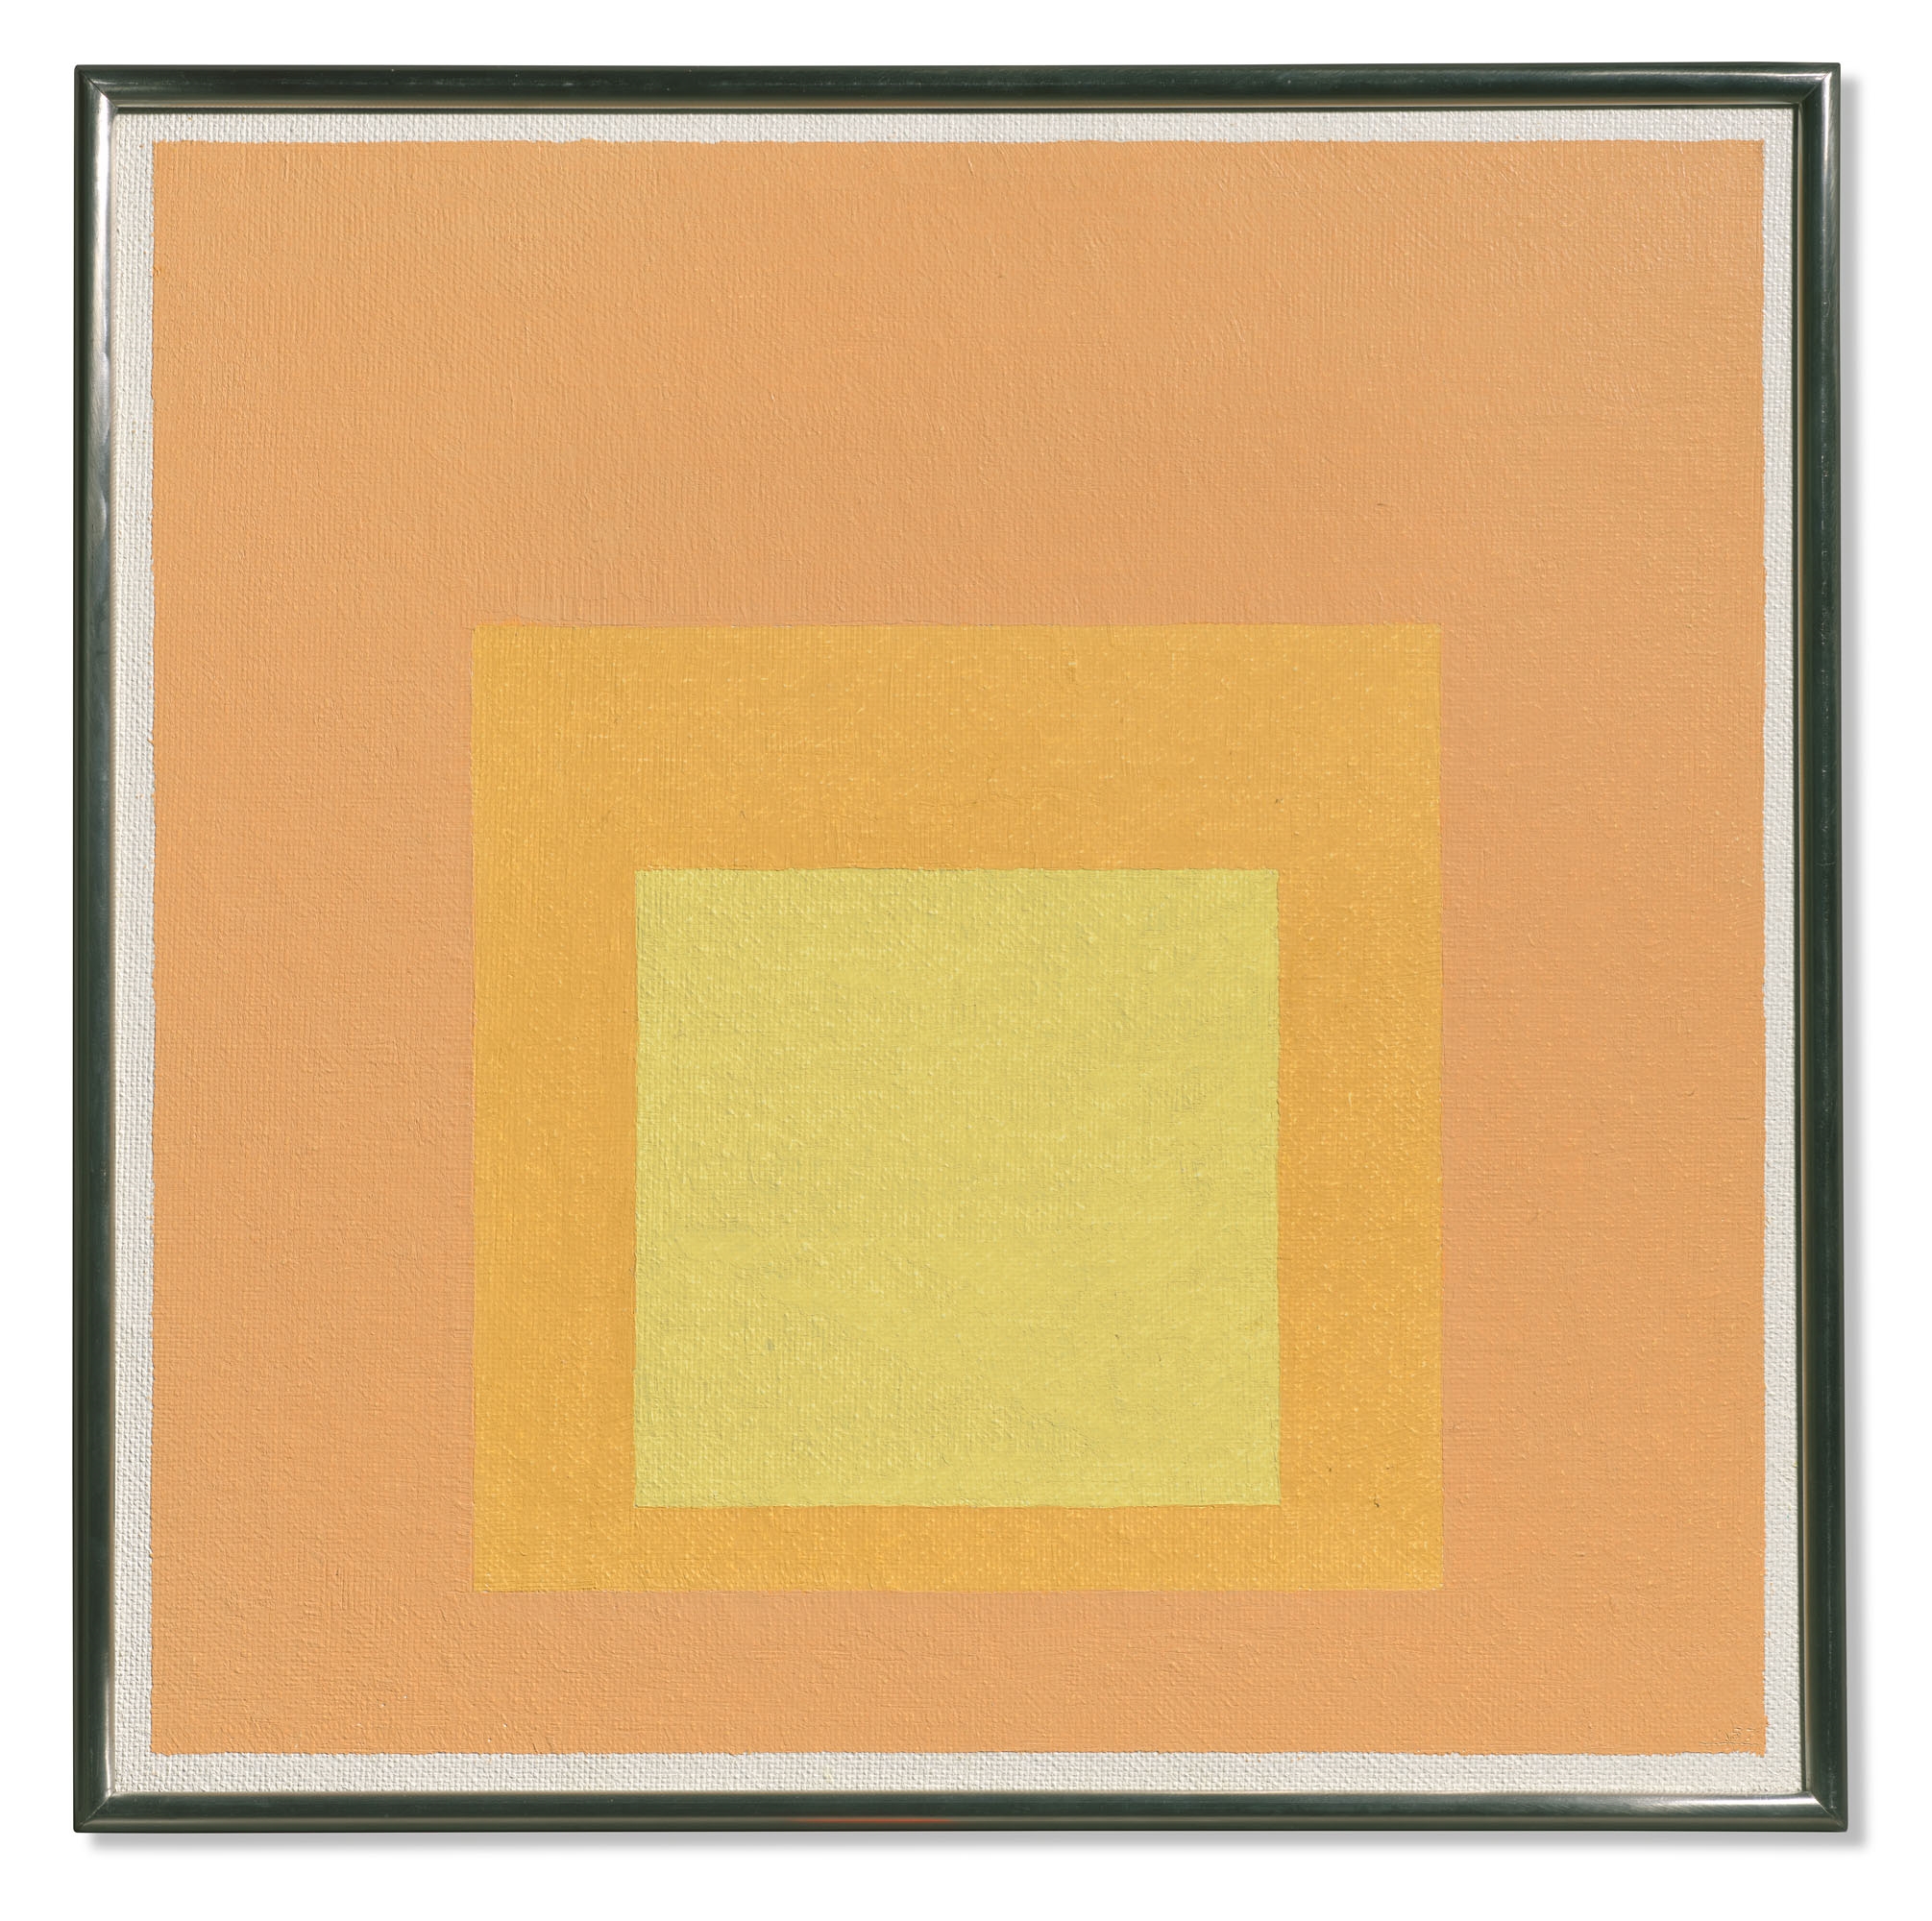 Homage to the Square by Josef Albers, 1957, Executed in 1957